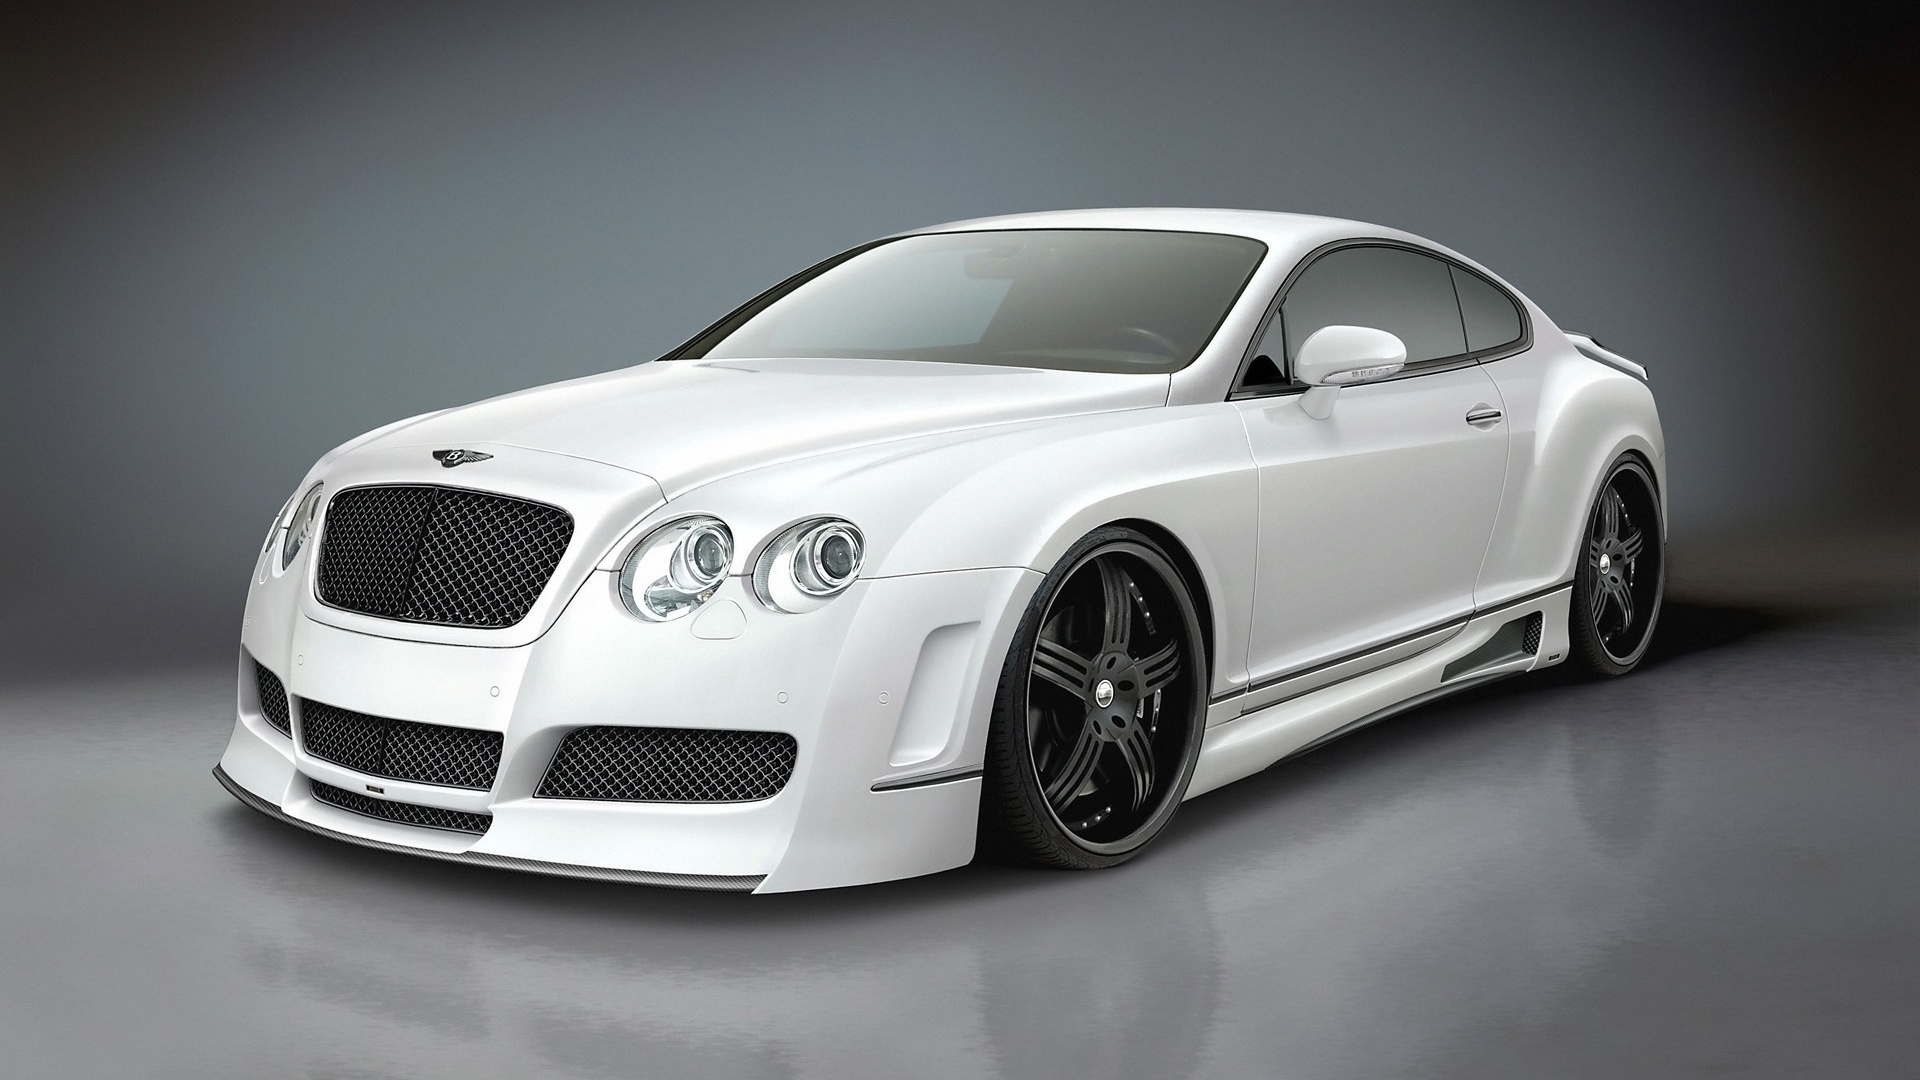 2009 Premier Bentley Continental GT for 1920 x 1080 HDTV 1080p resolution